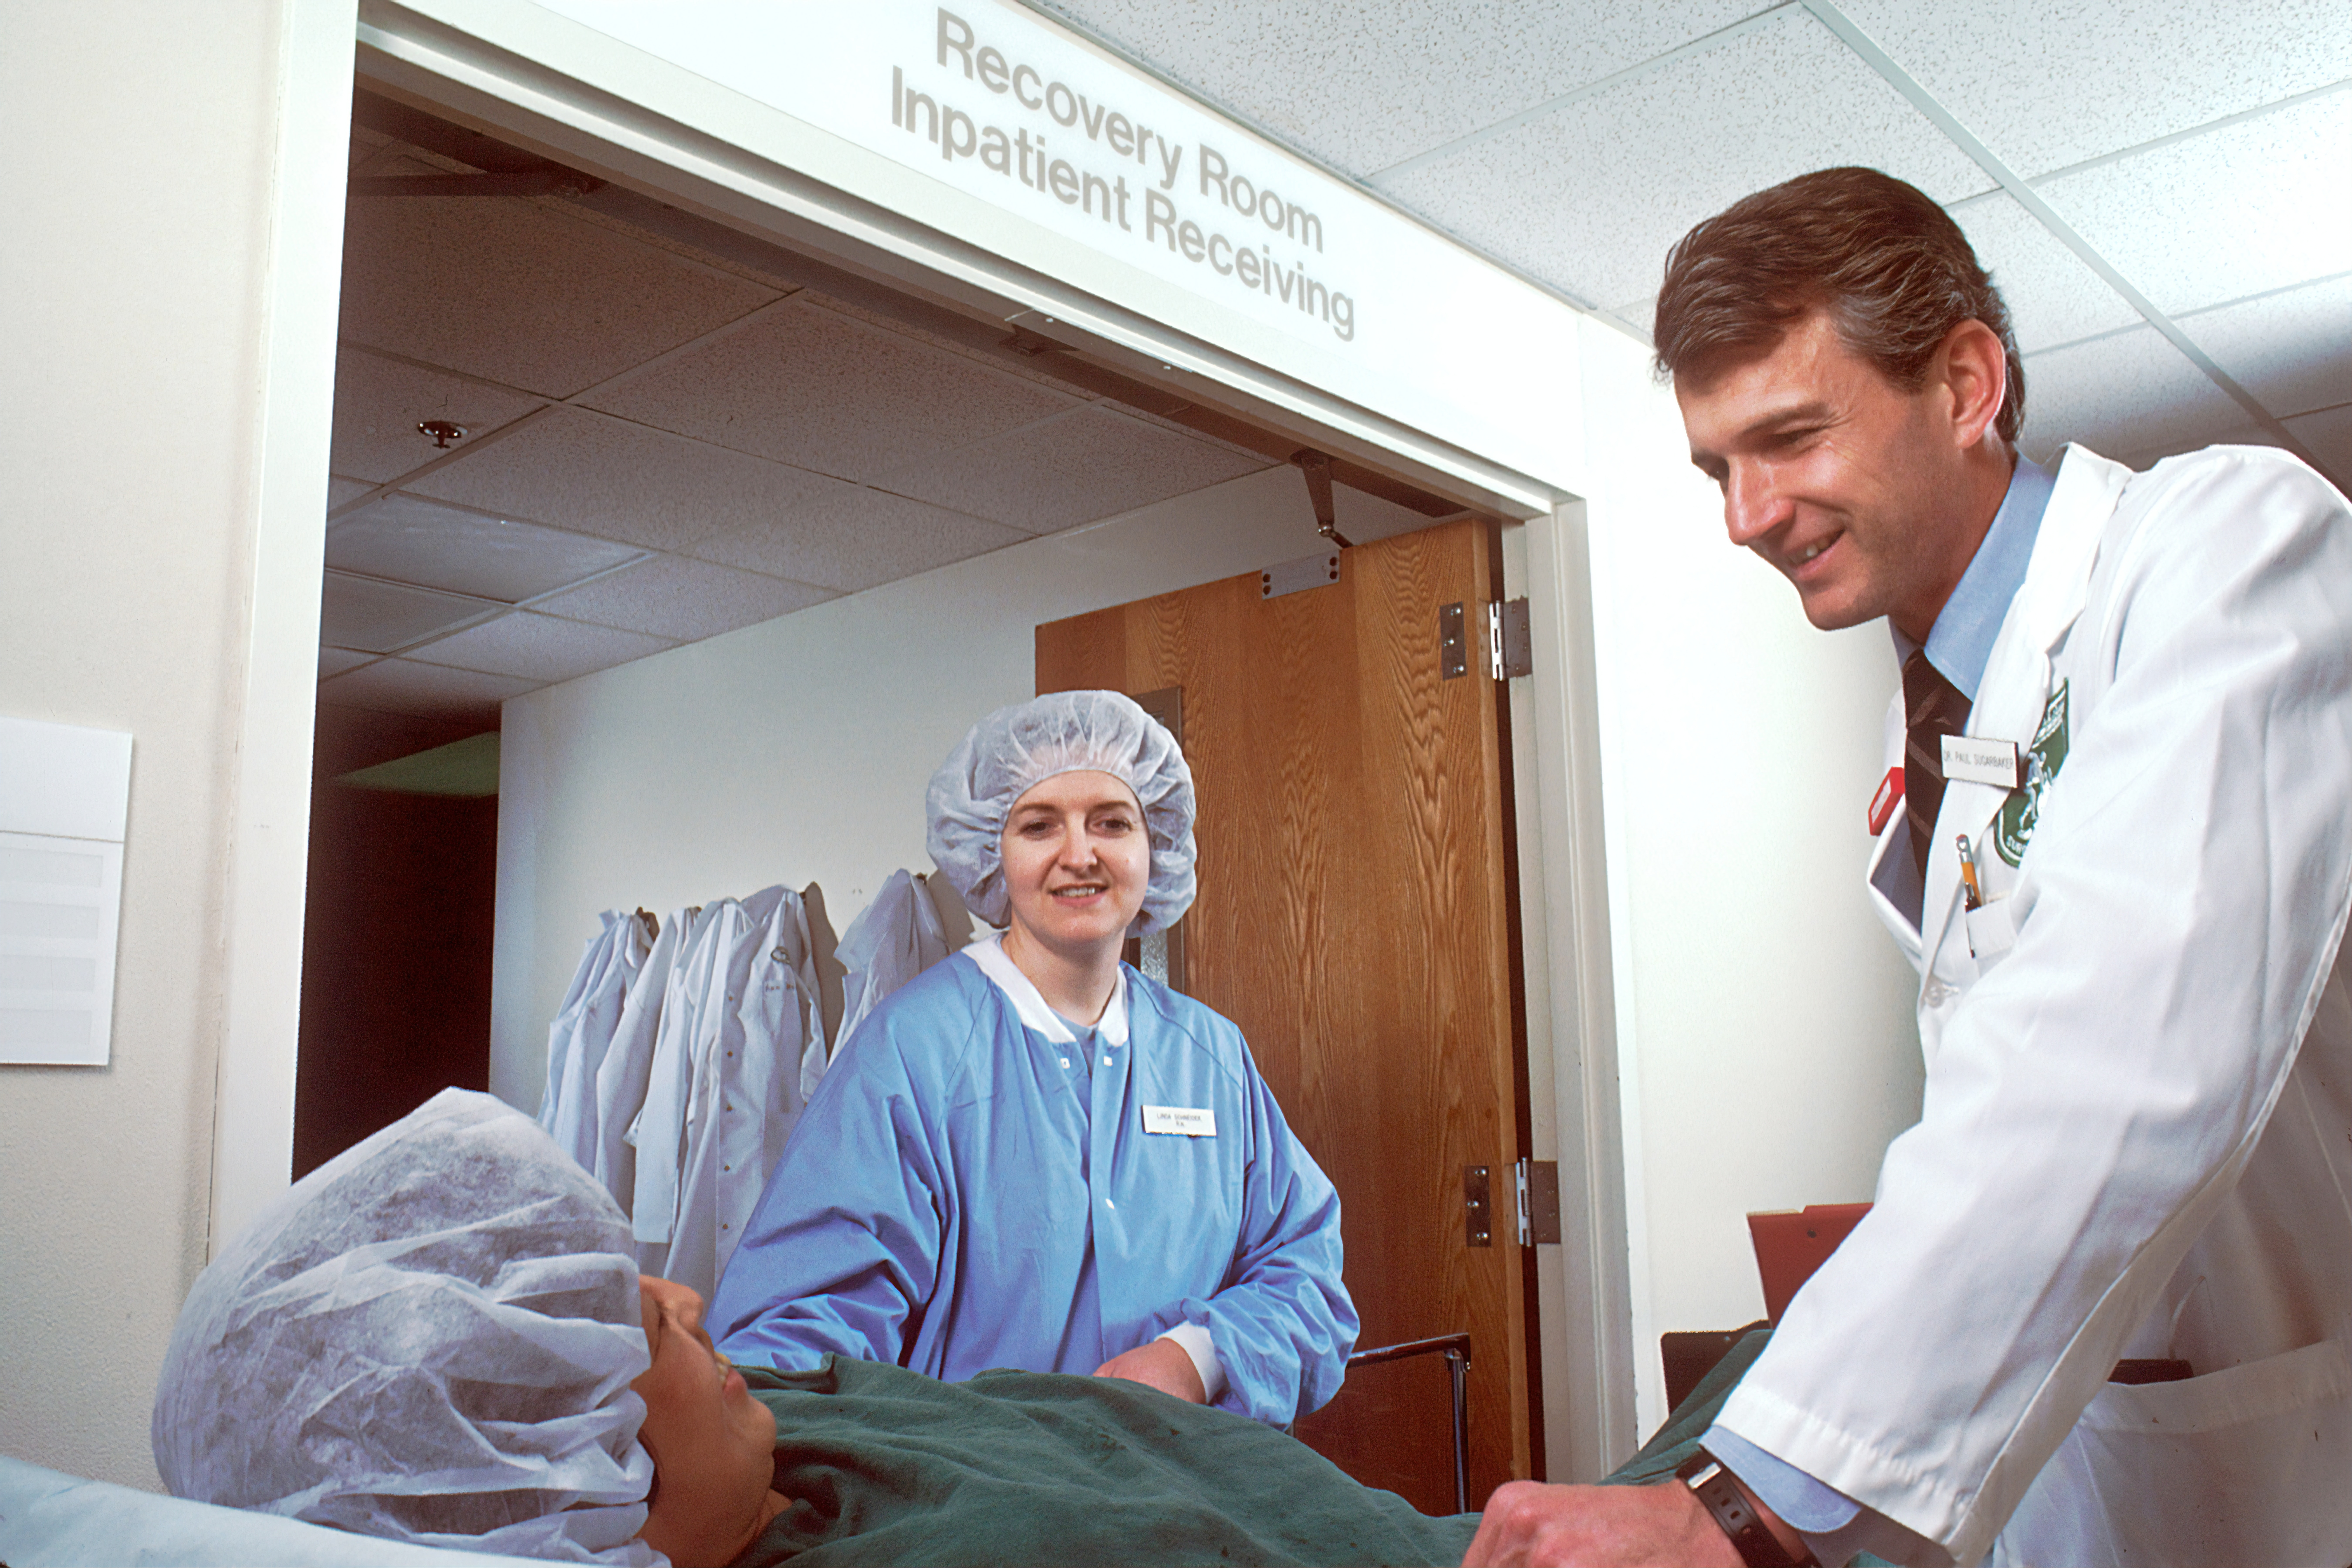 male doctor in white coat leaning over a patient; woman in blue scrub jacket and cap by the side